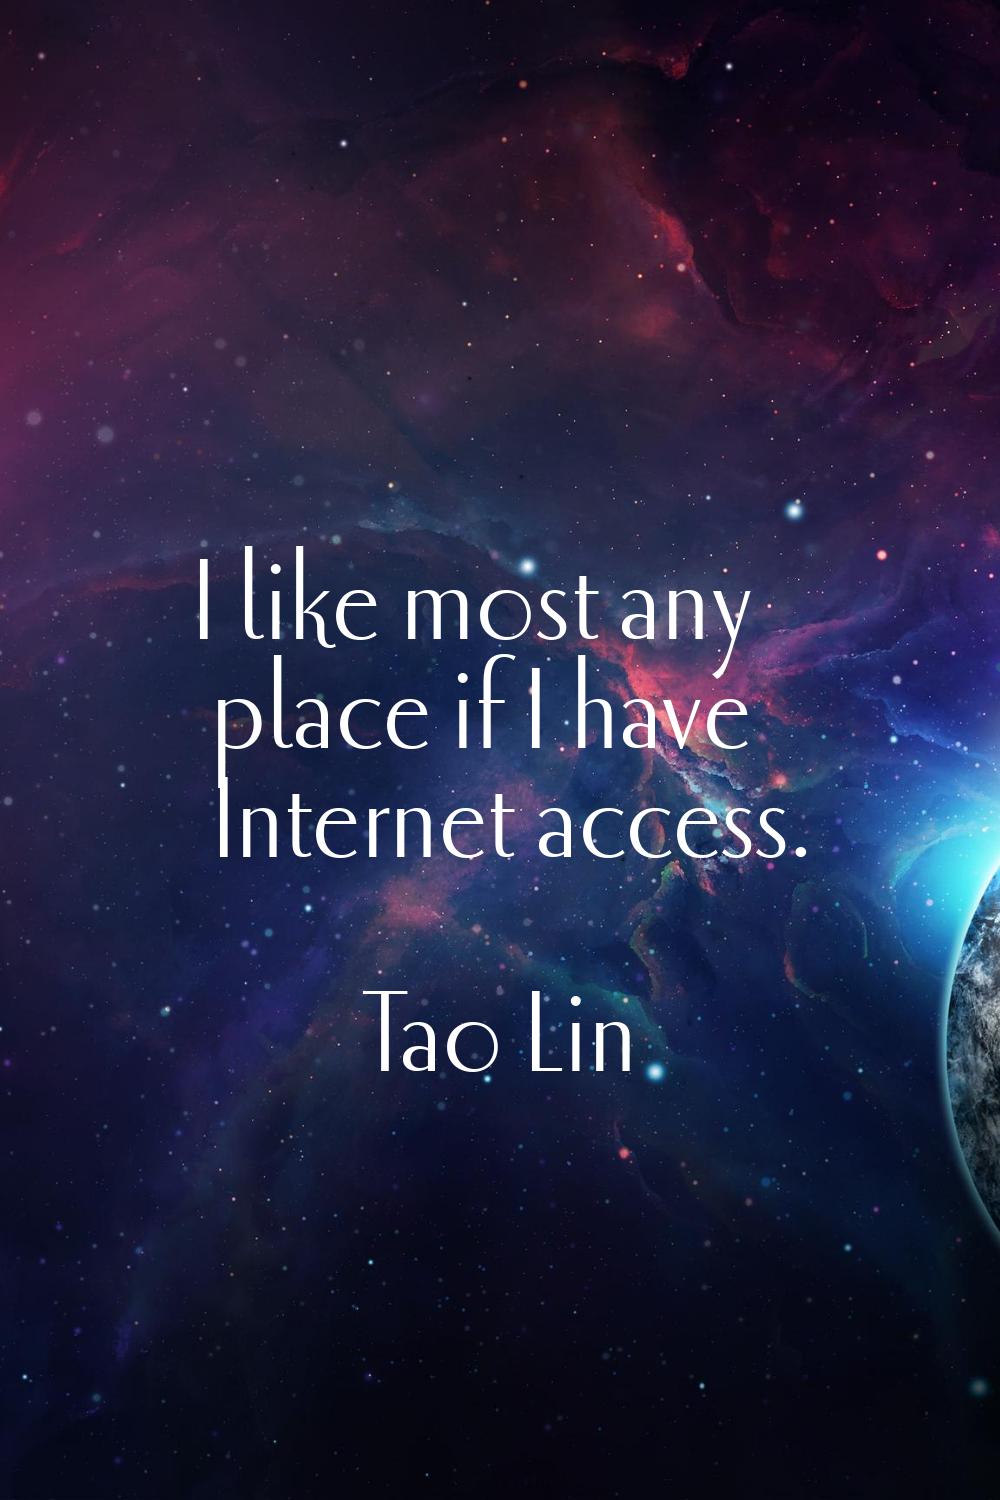 I like most any place if I have Internet access.